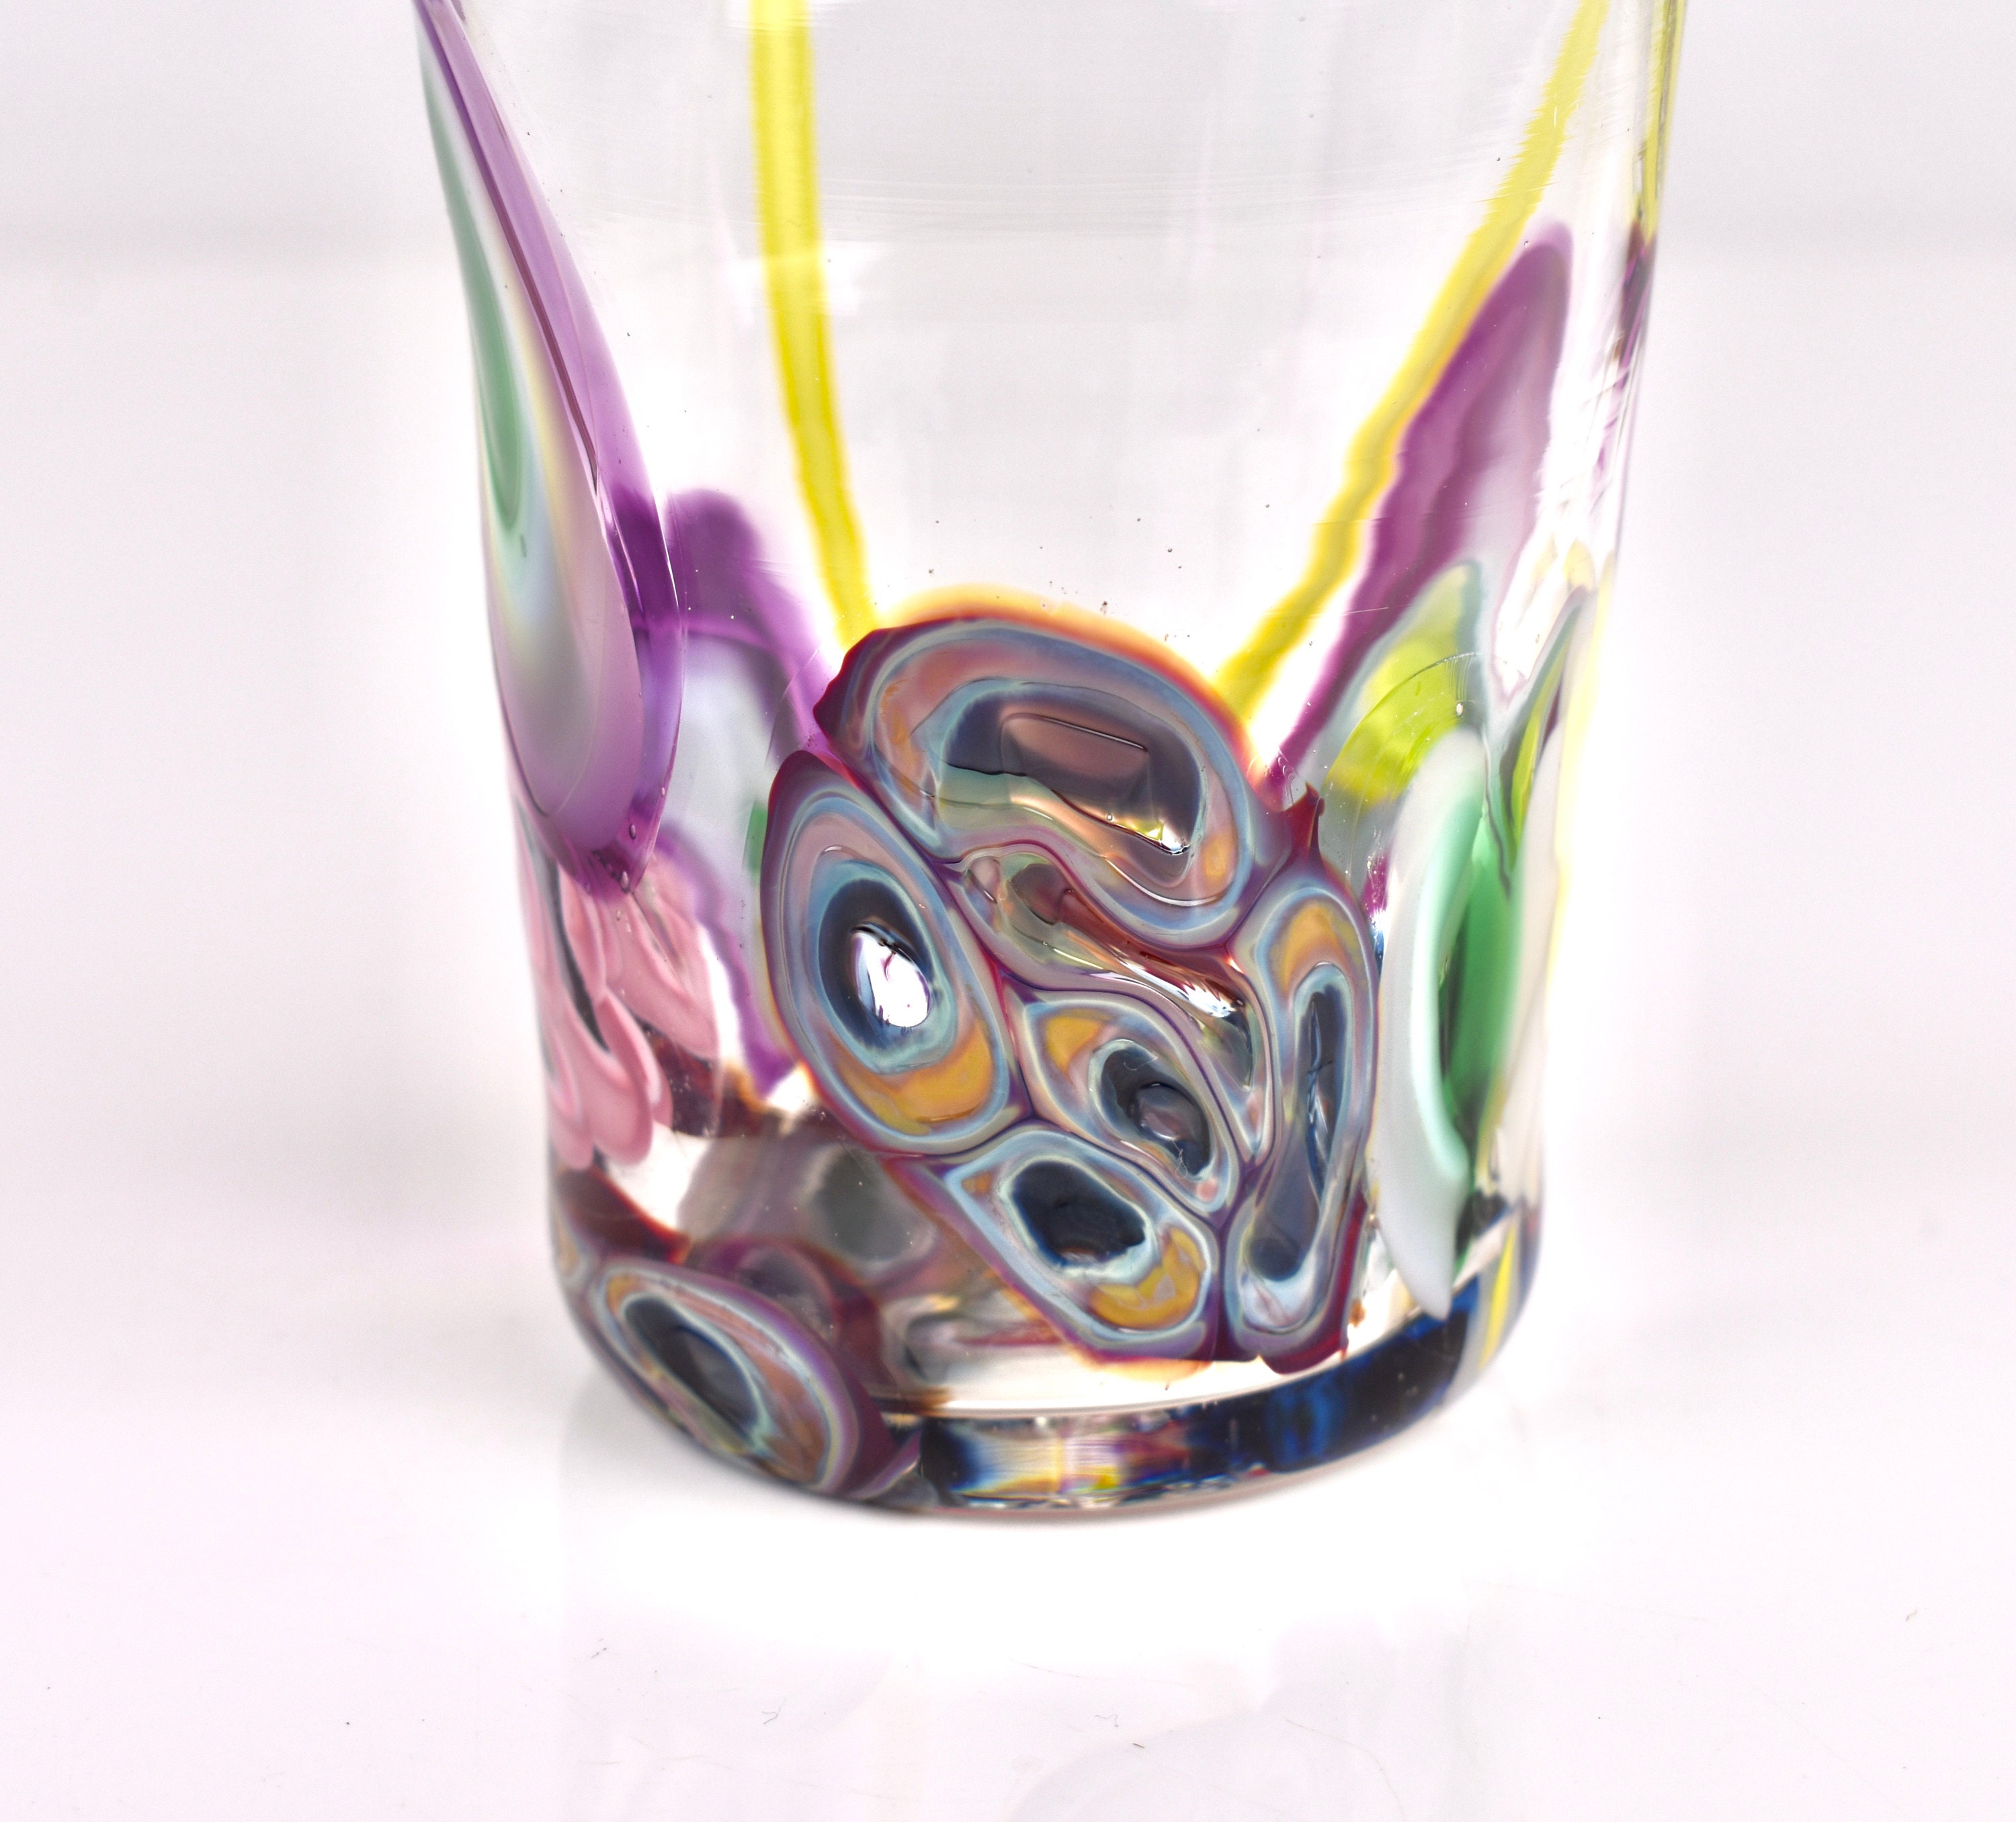 KREA glasses creative drinking glasses - Party Glass